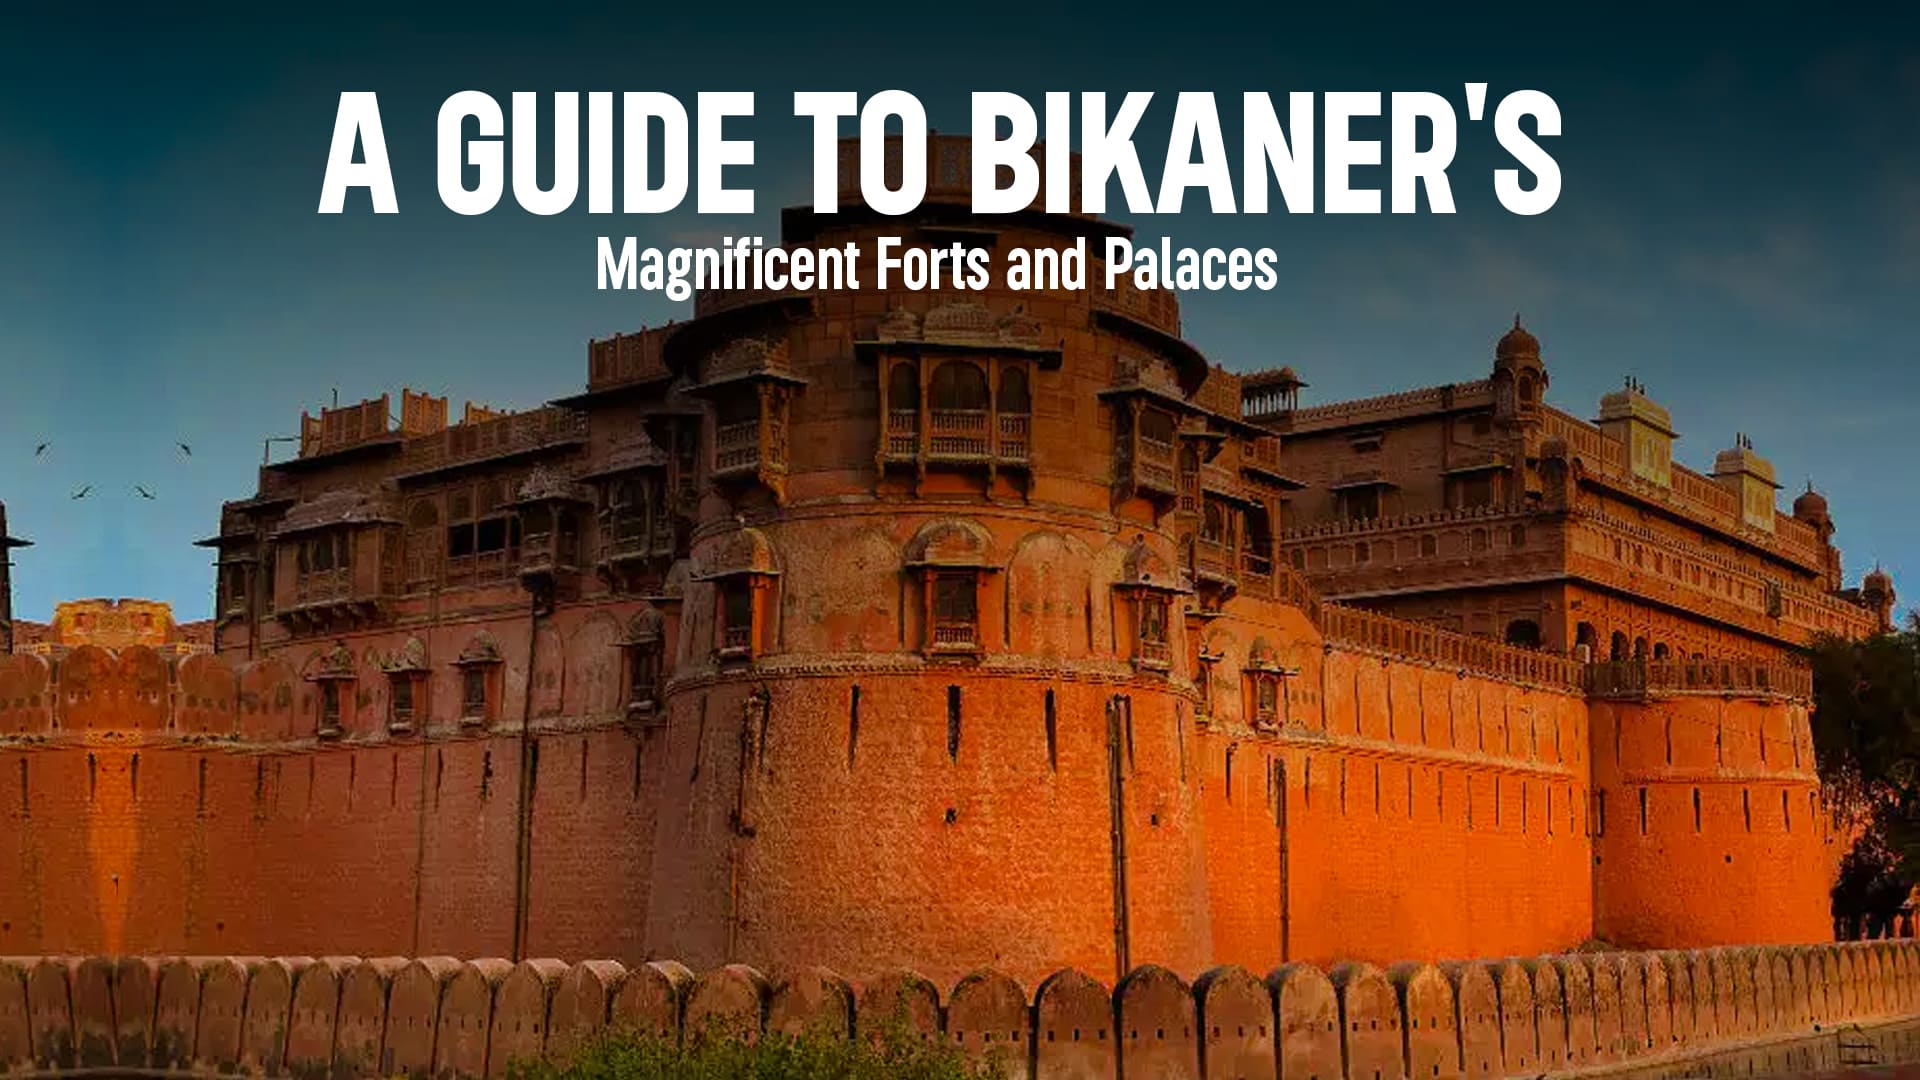 A Guide to Bikaner's Magnificent Forts and Palaces